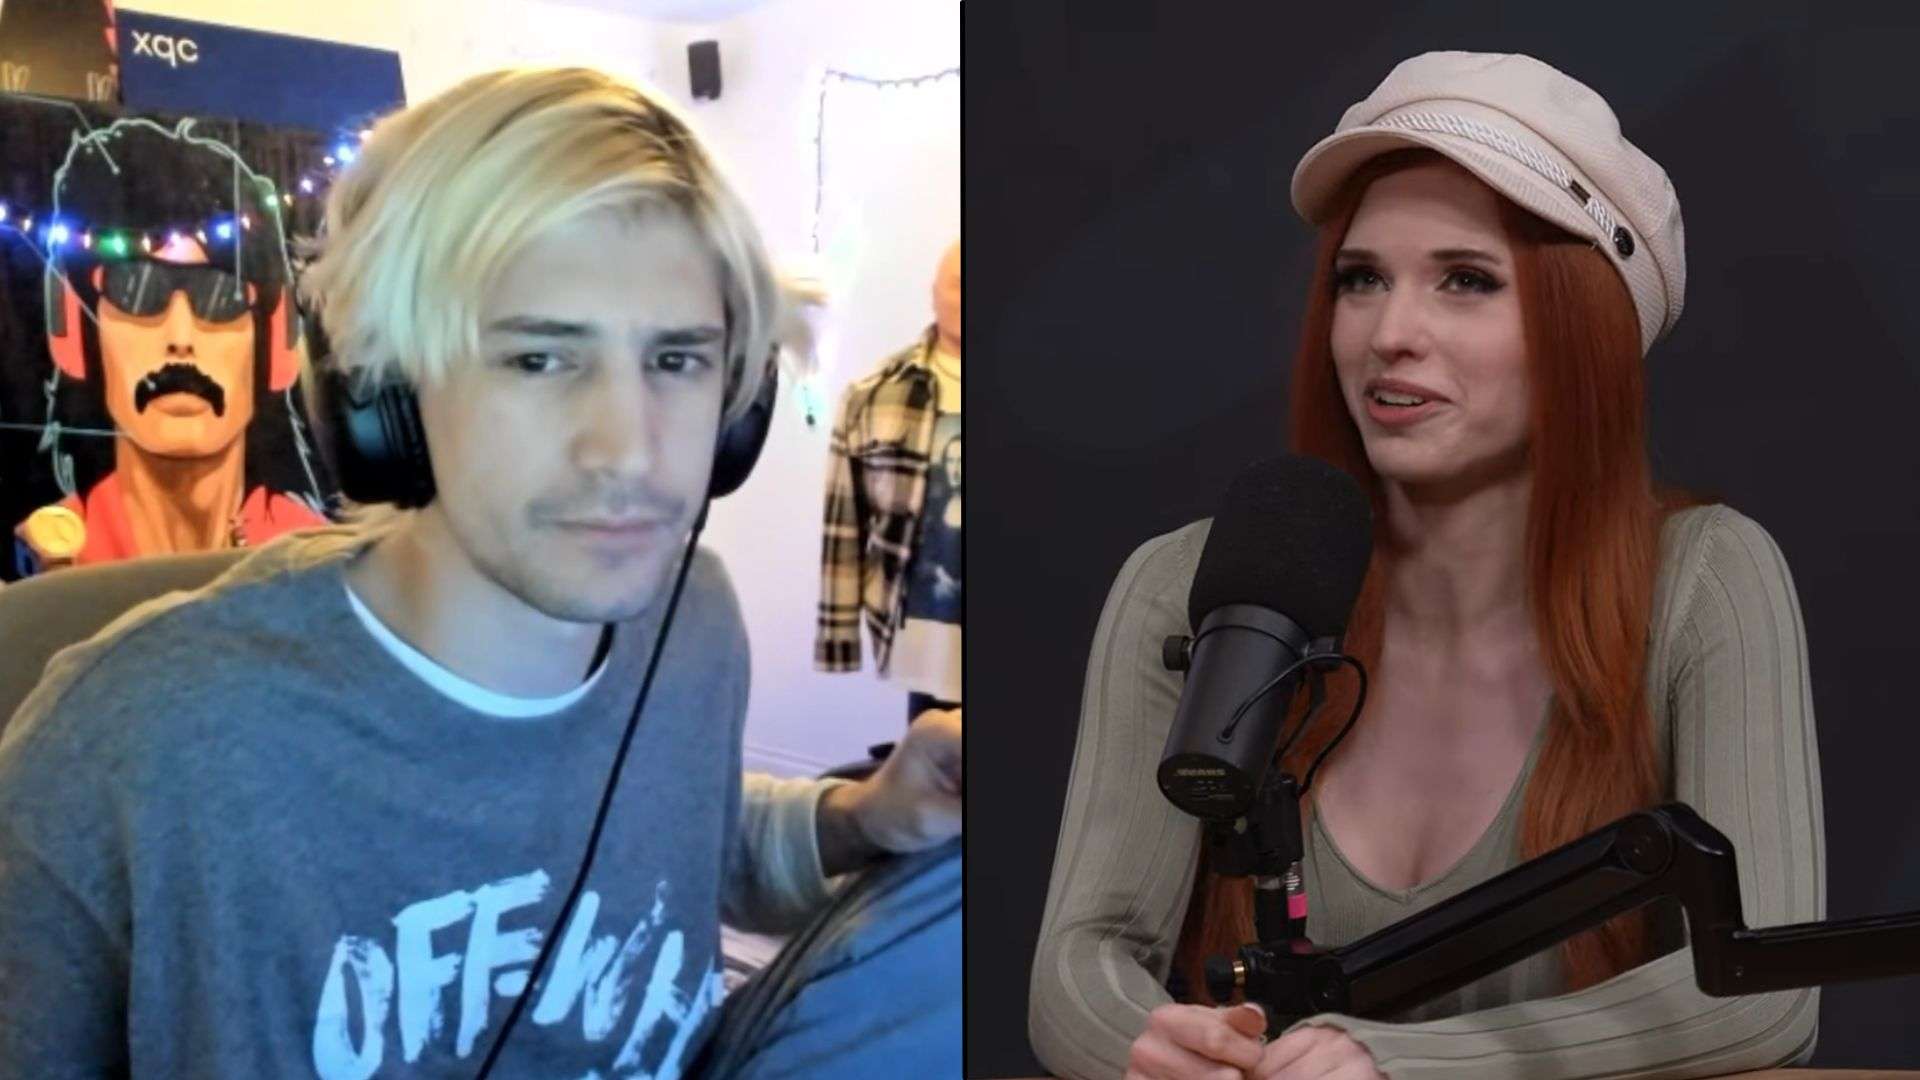 xQc and Amouranth talking into mic while side-by-side